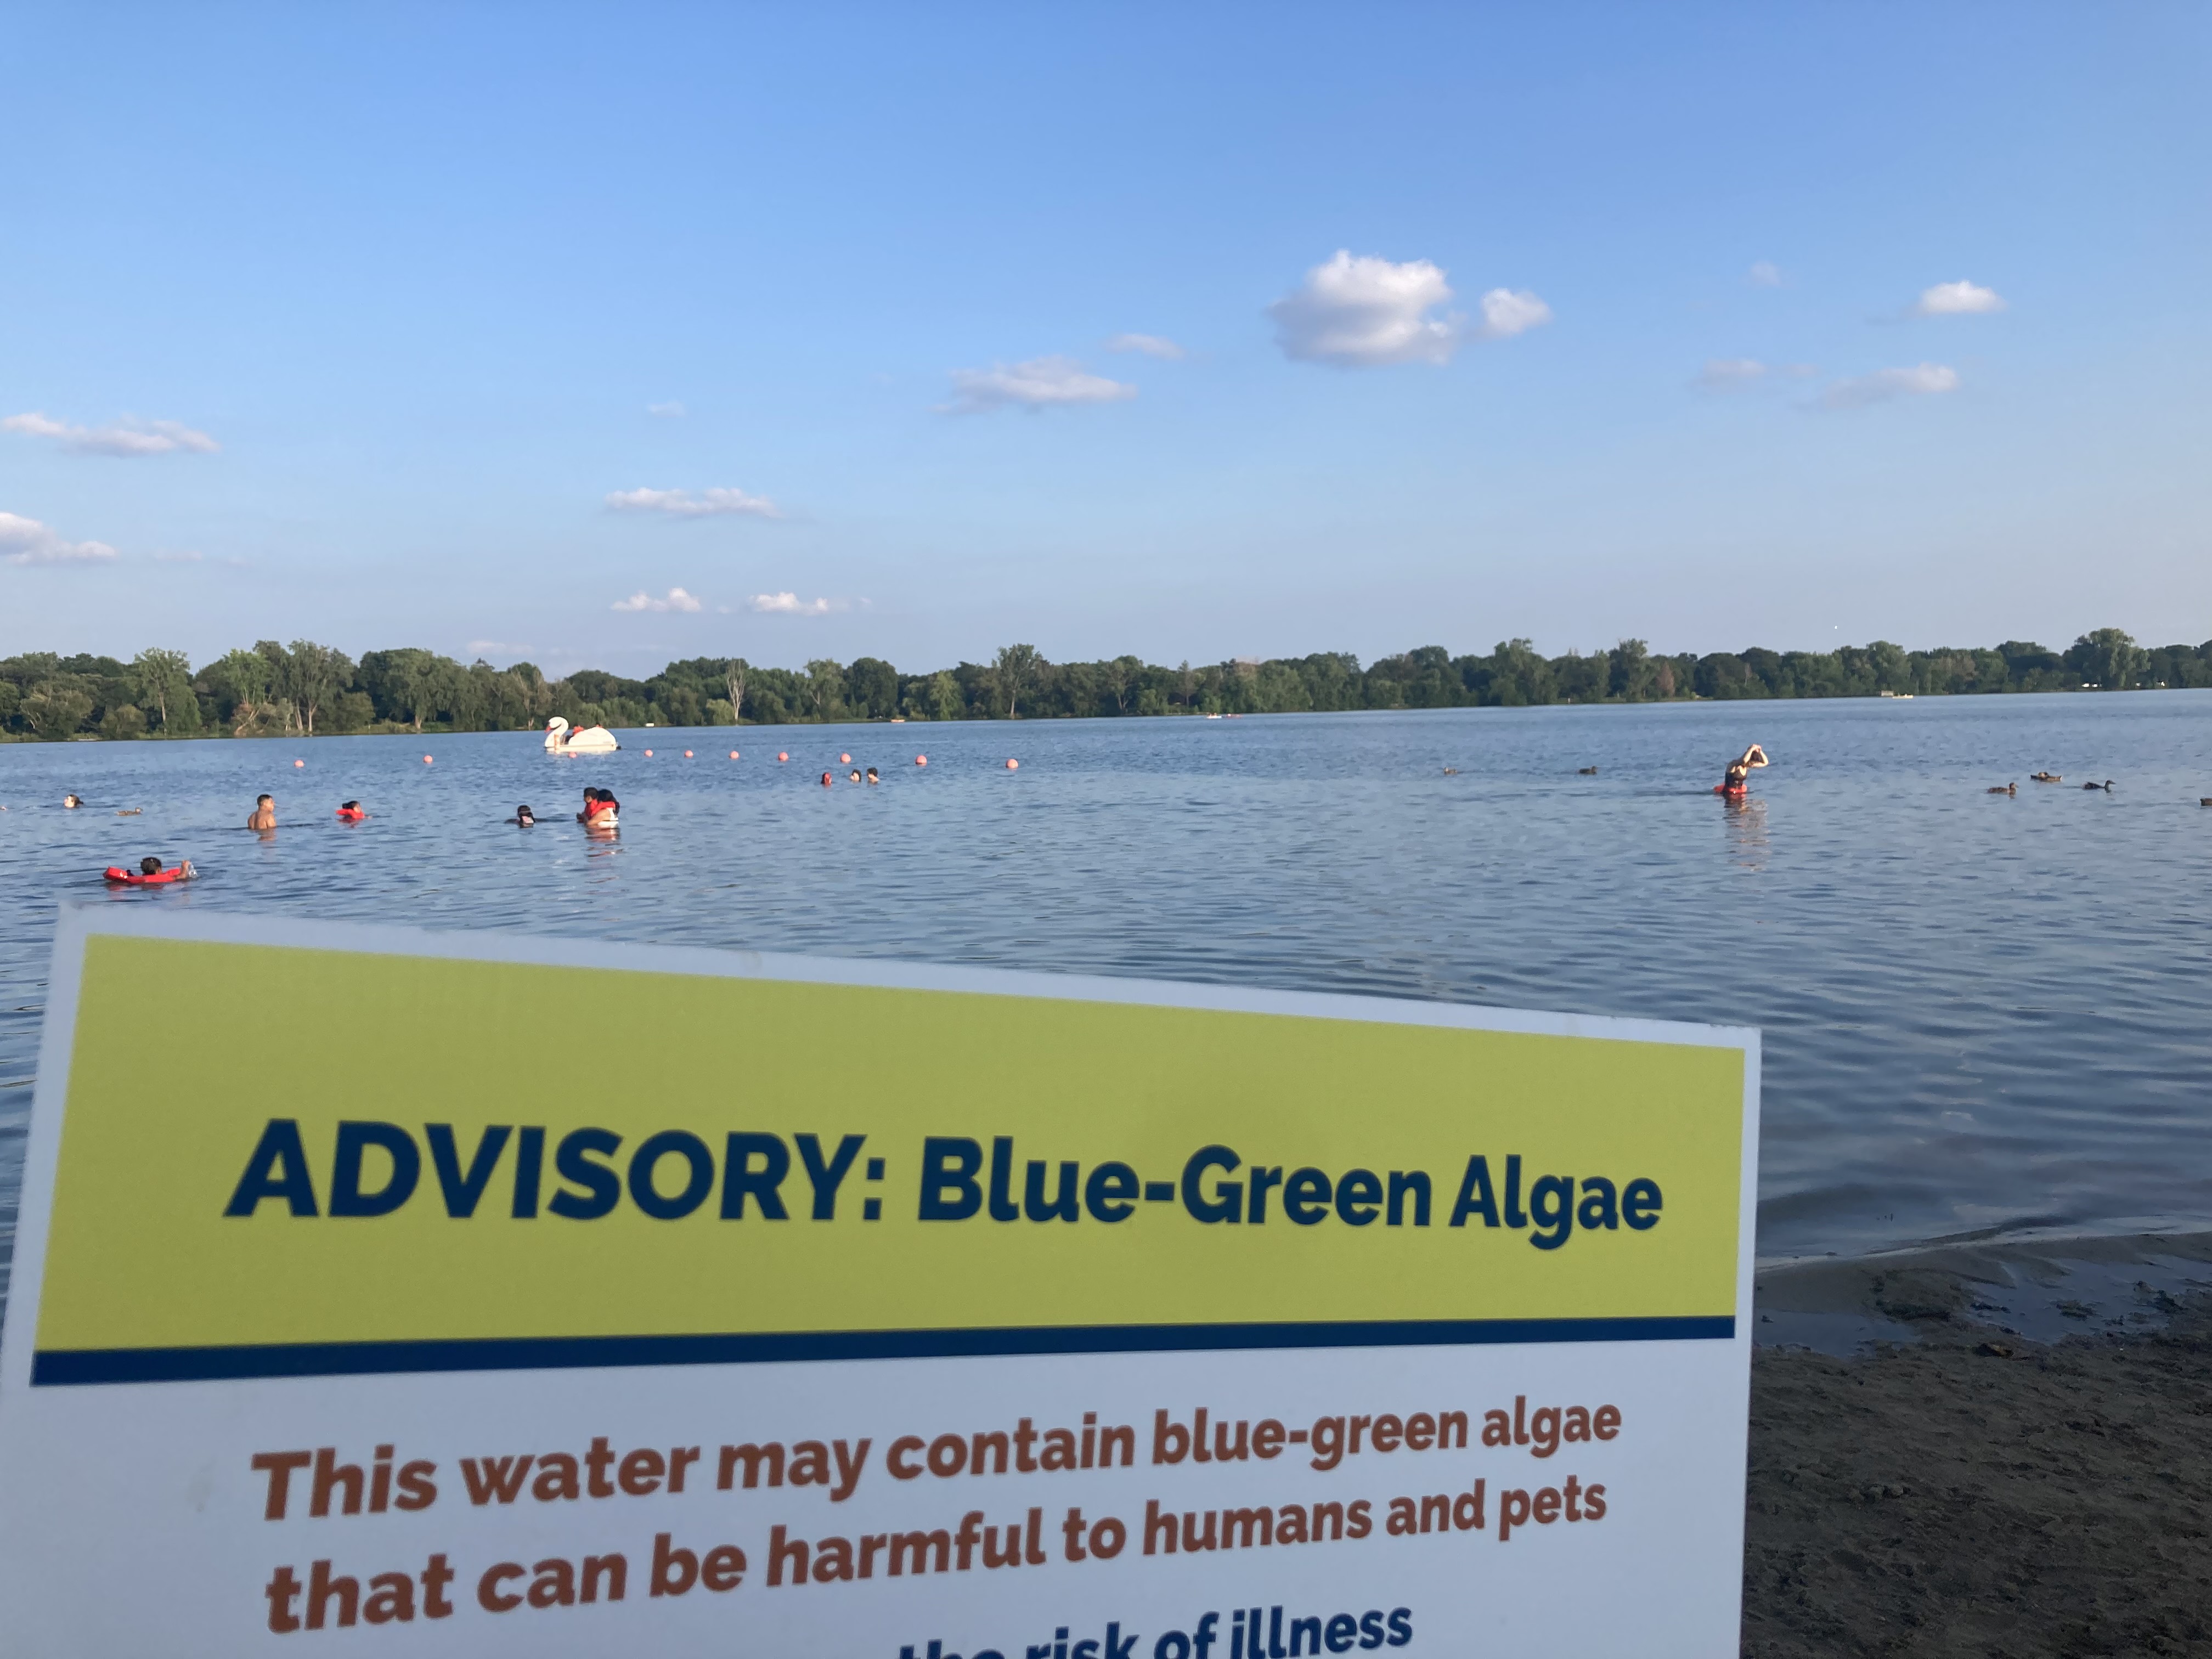 a lake with people swimming in it and a sign that says warning may contain blue green algae, which can be harmful for pets and people